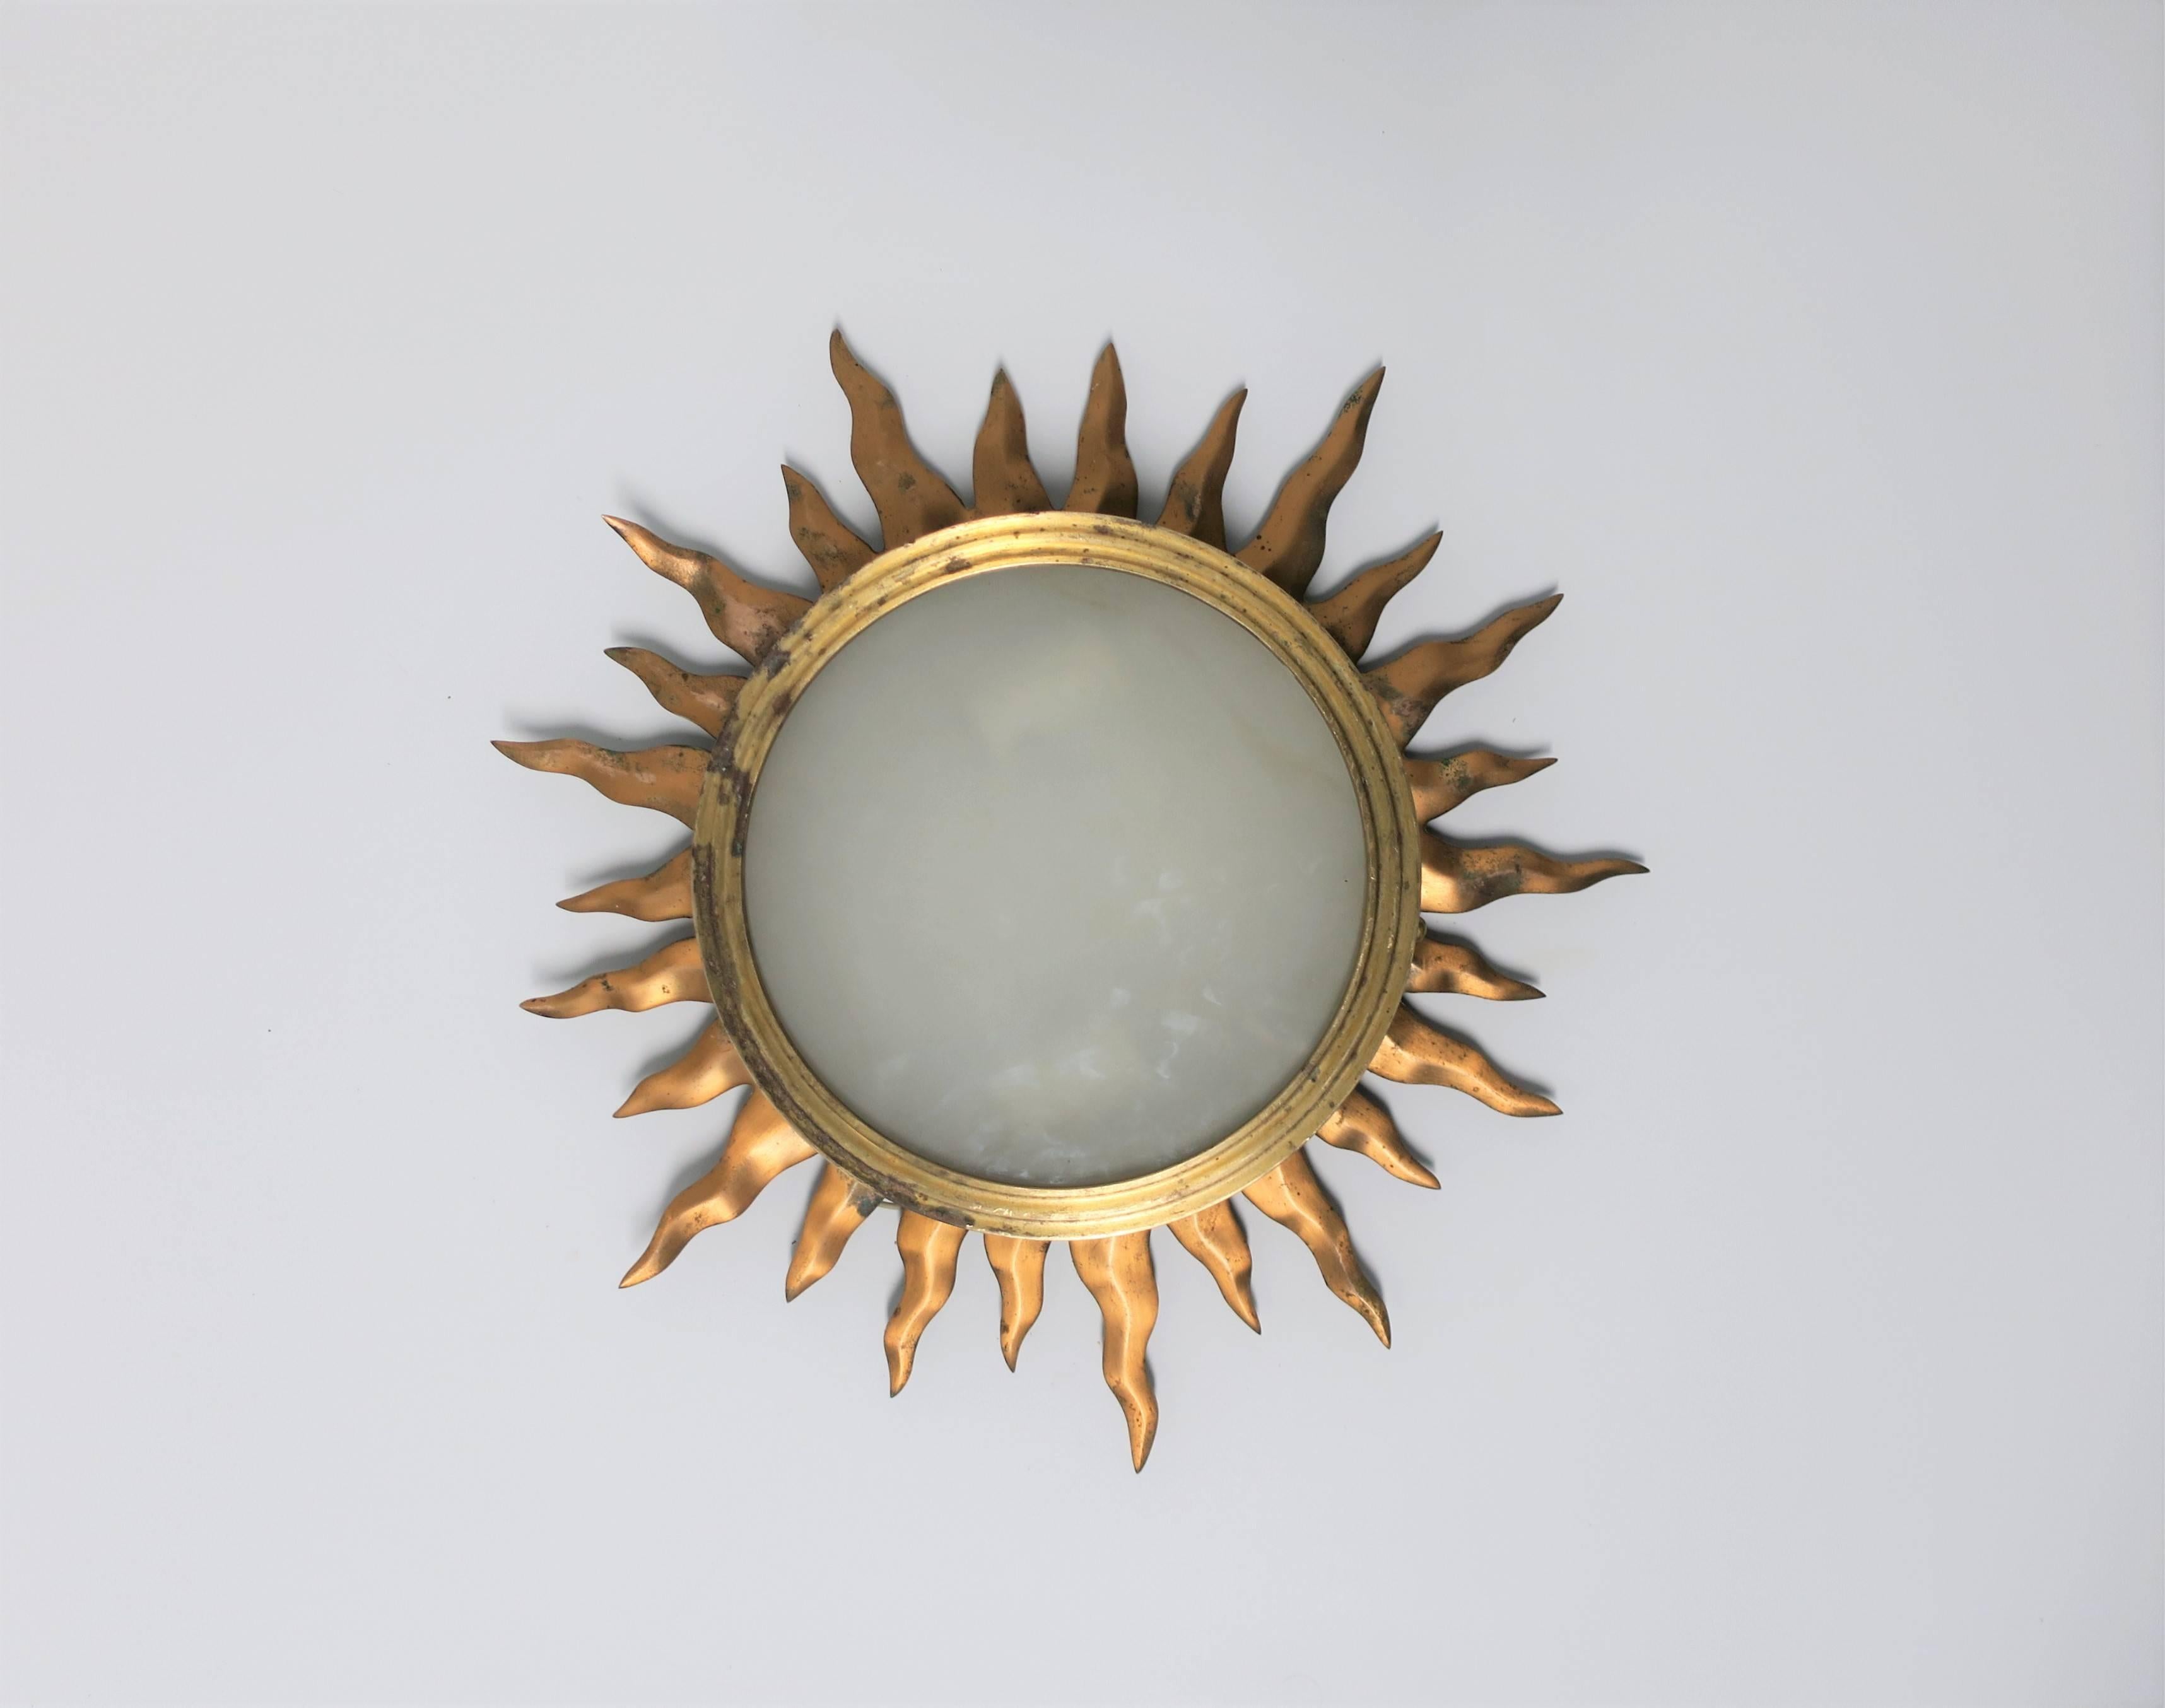 Vintage brass and translucent glass starburst flush mount (flushmount) ceiling light. 
There are two available. Lights are being sold individually.

Measurements: 2 in. height x 15 in. diameter
Light/lamp area only: 8.25 in. diameter.

Second light